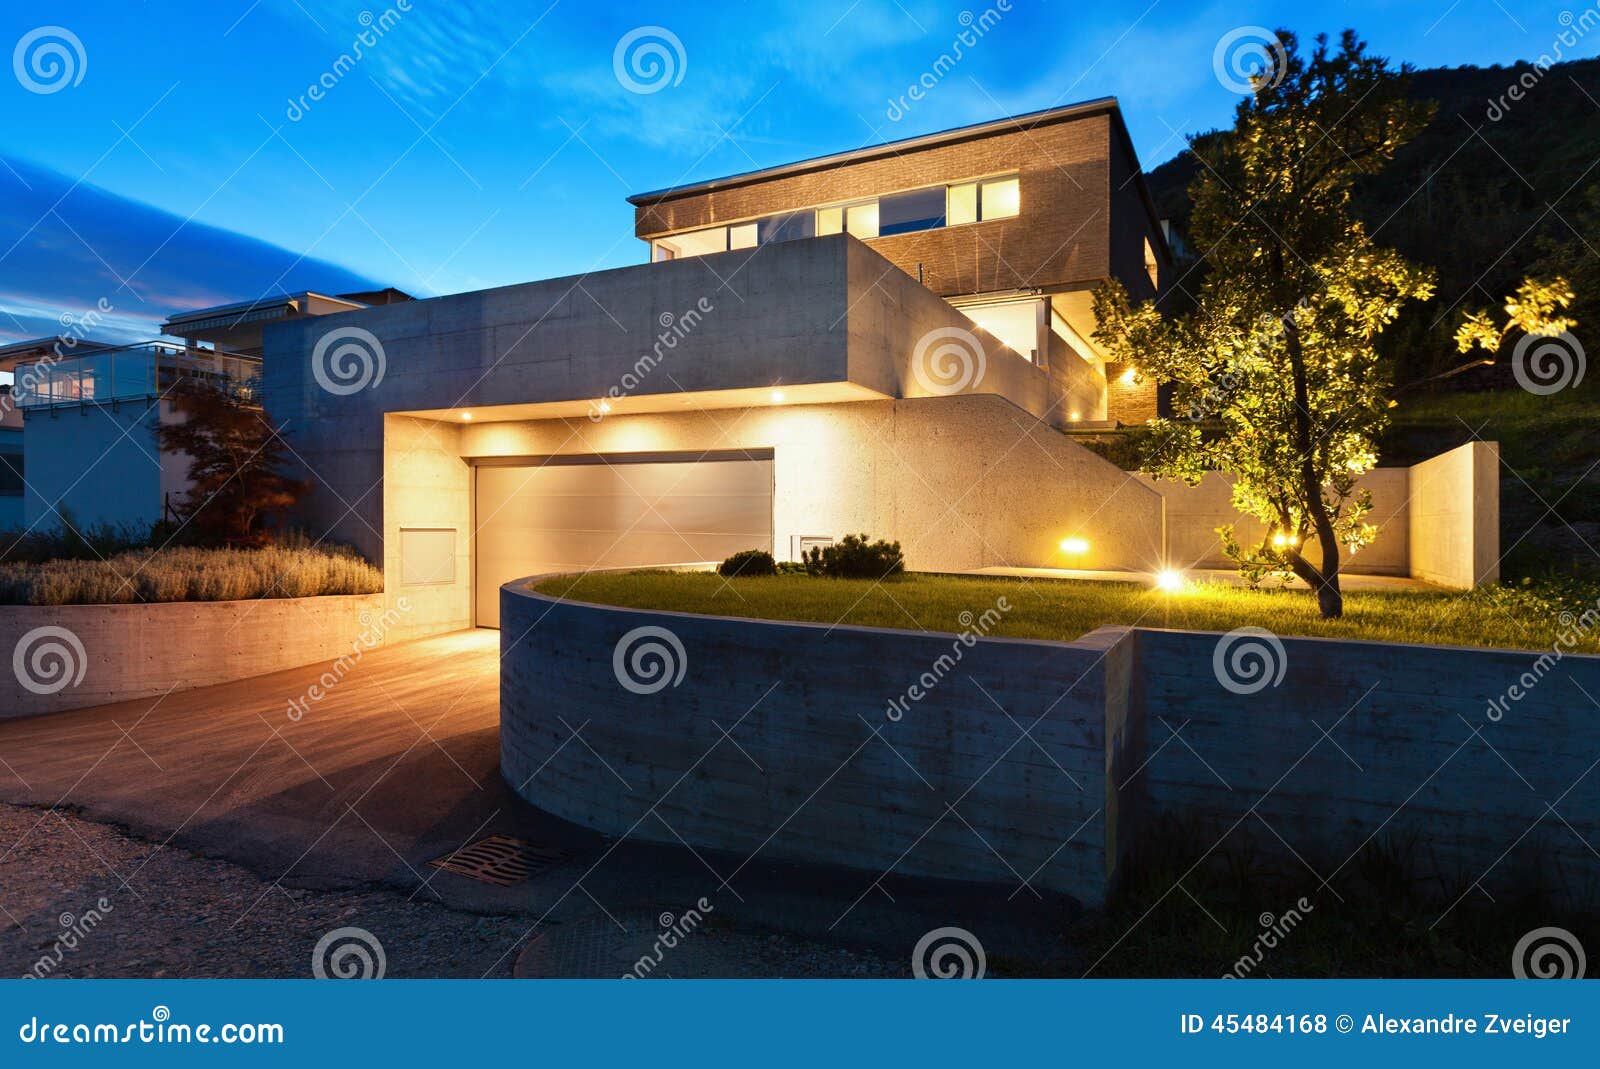 architecture modern , house